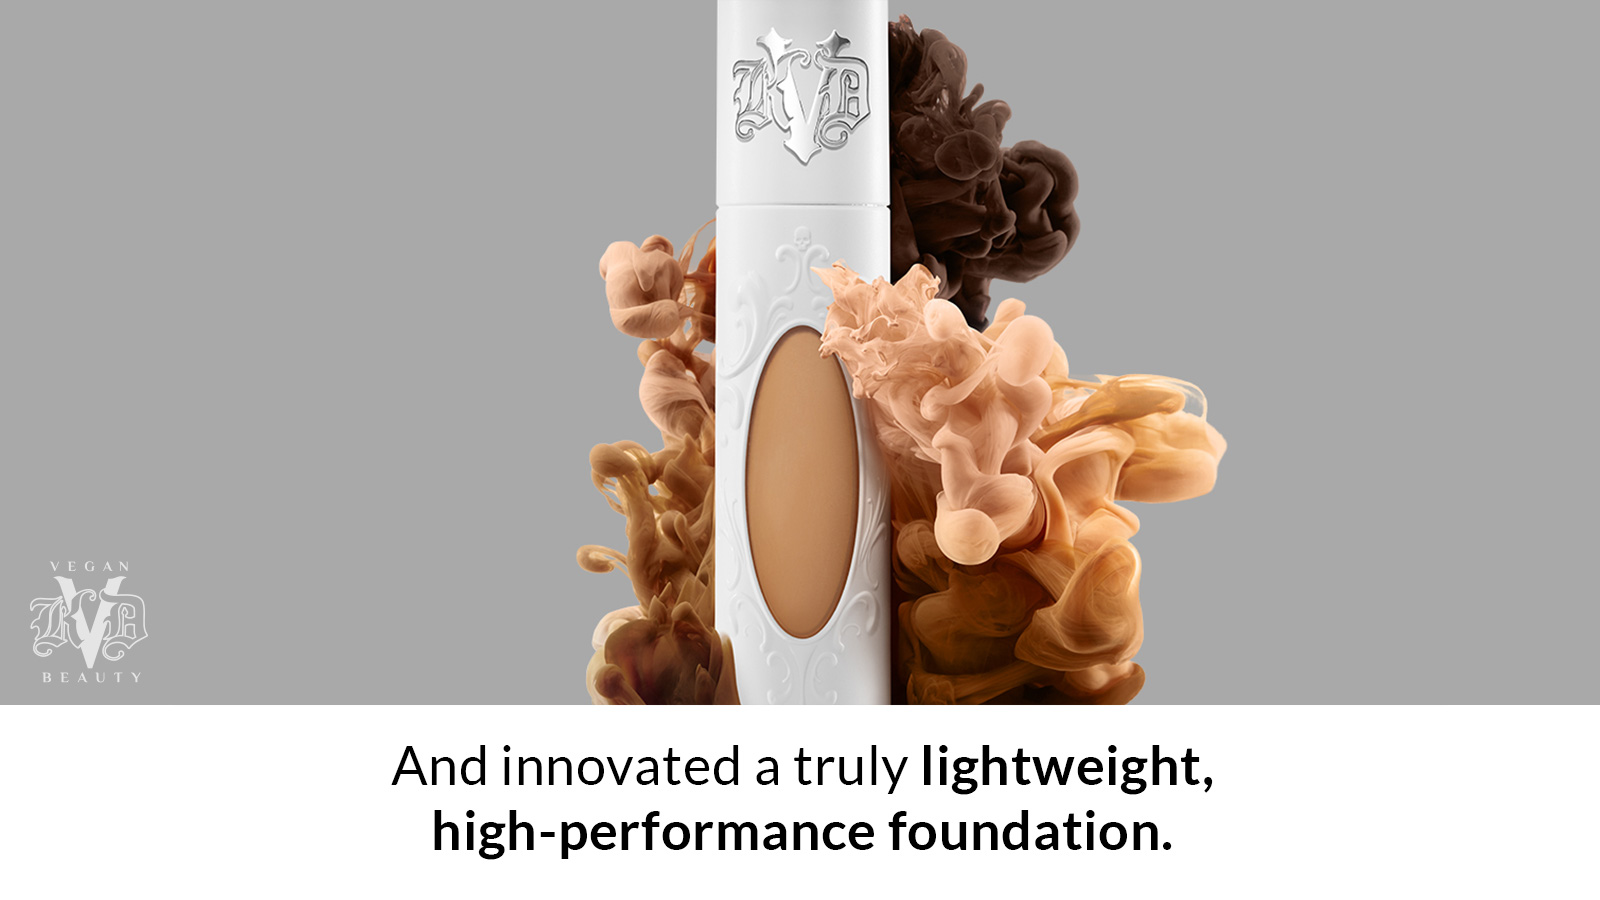 Innovated a truly lightweight, high-performance foundation.